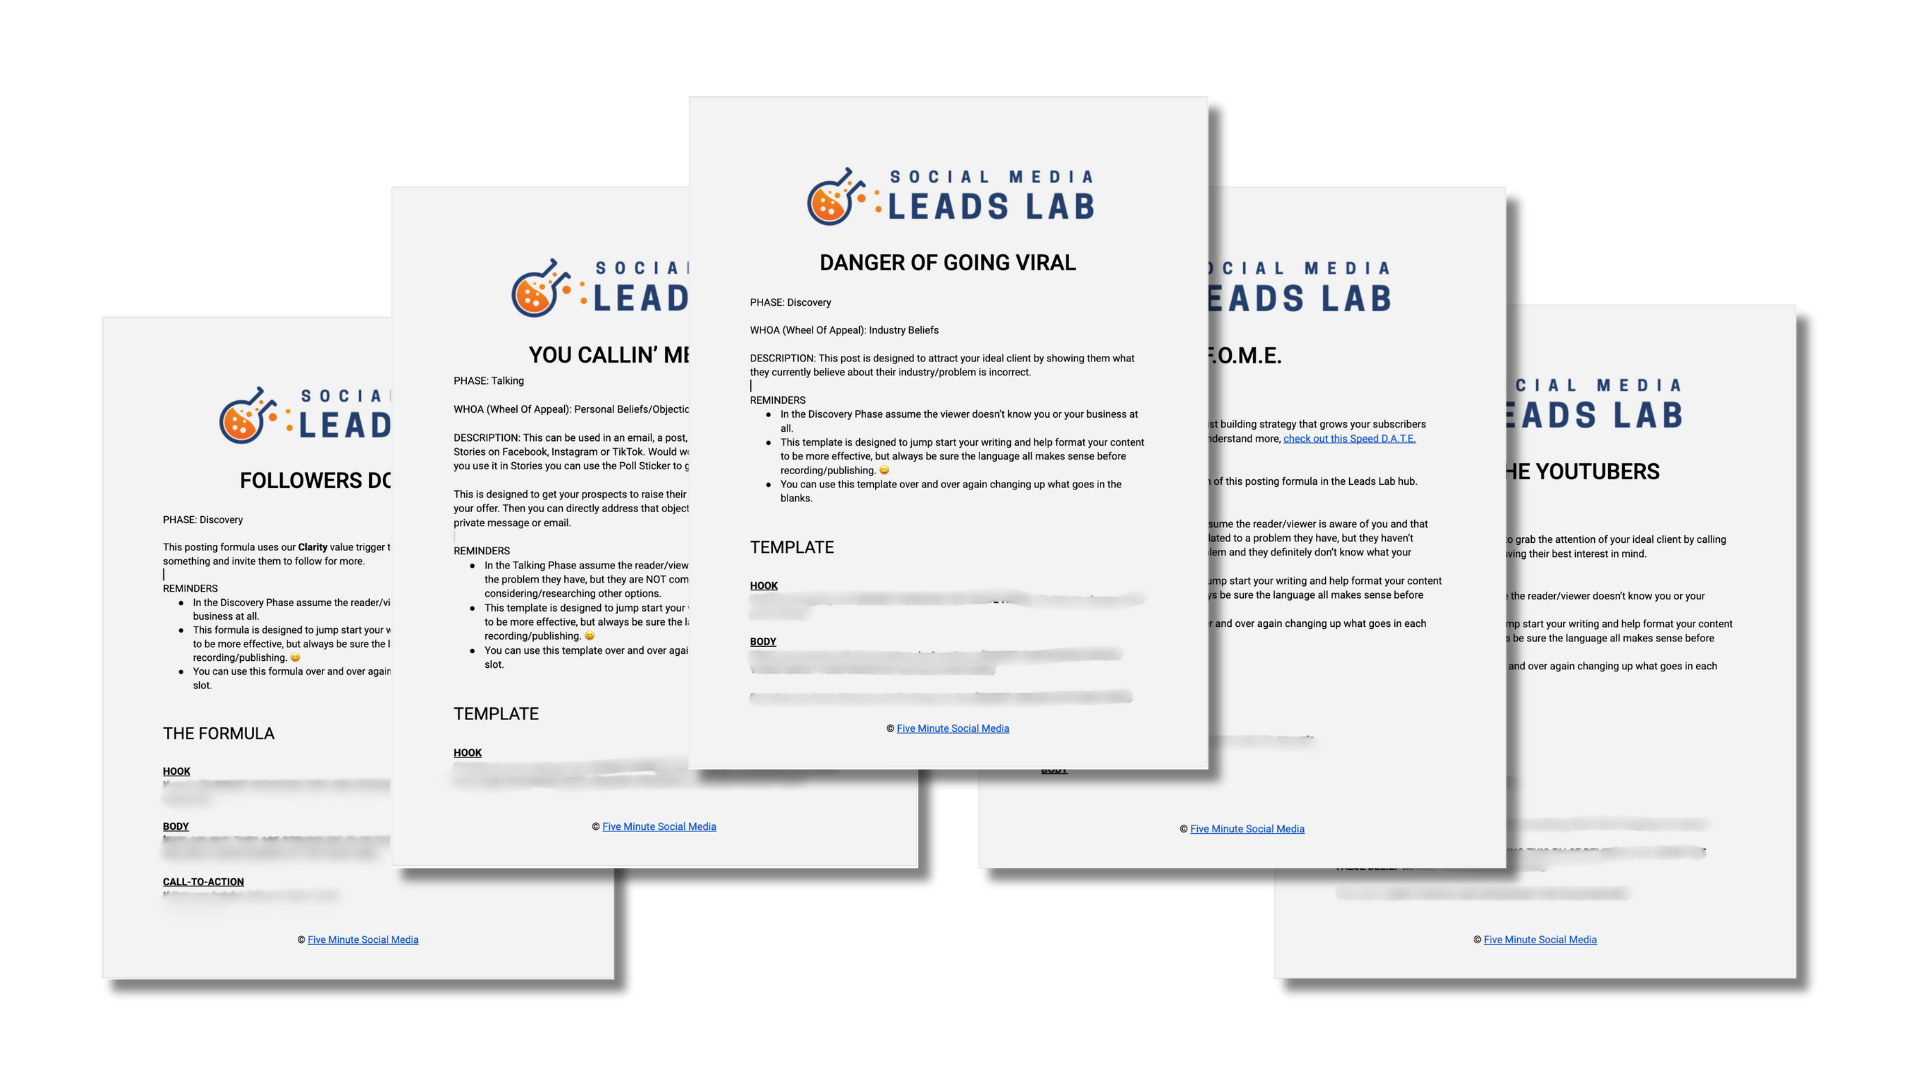 29 Days To Endless Free Leads Course